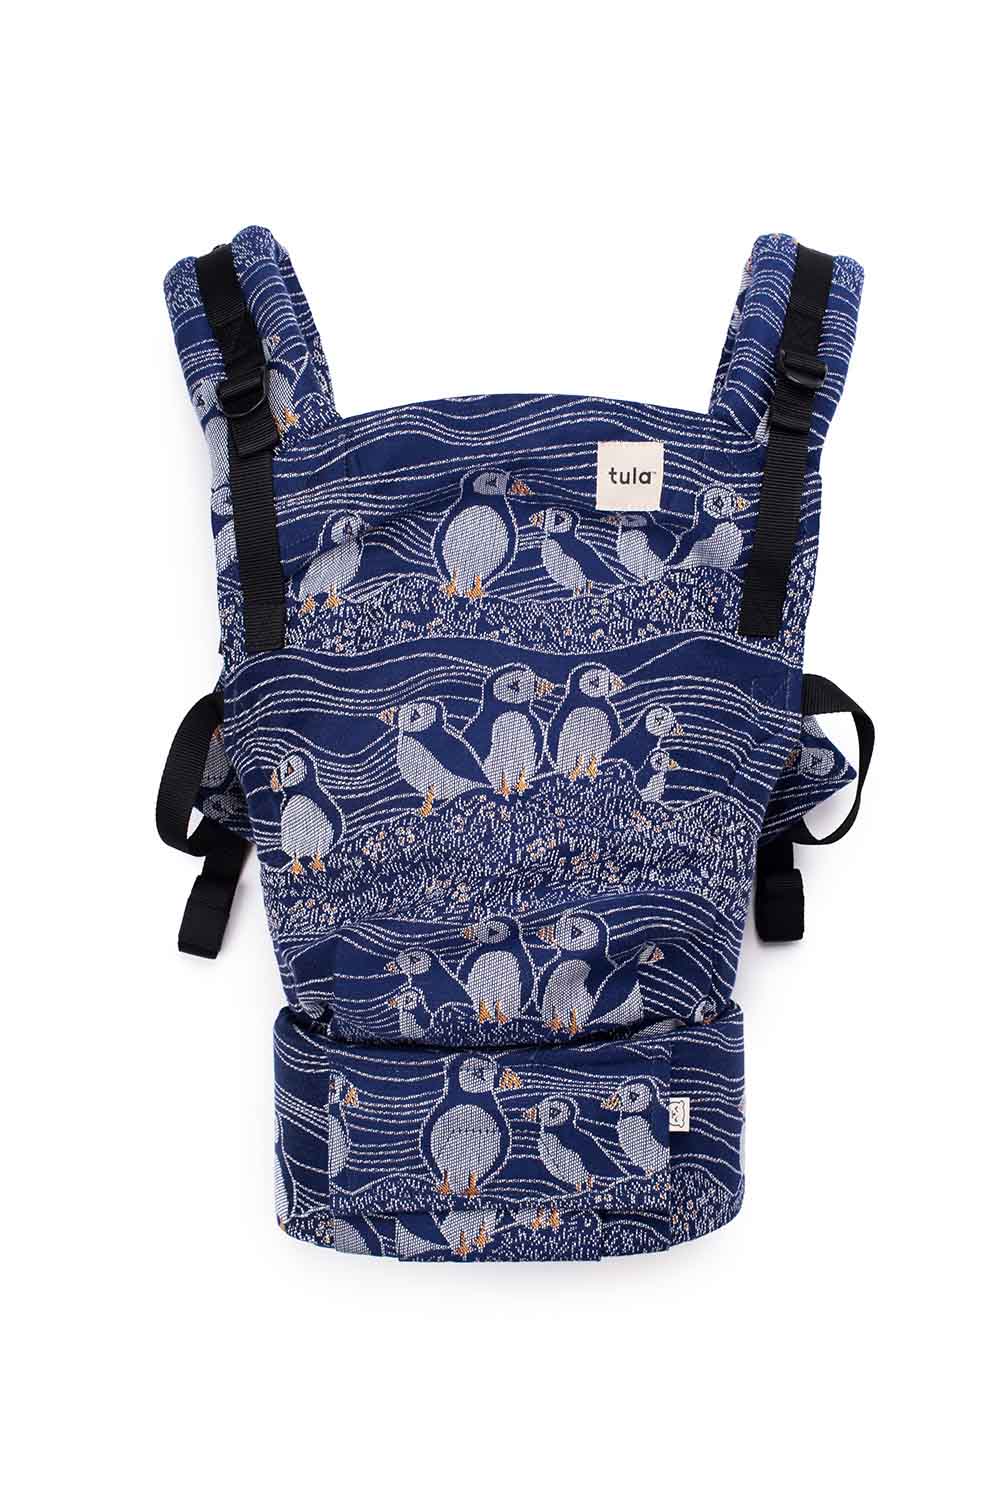 Puffins Arisaig - Signature Woven Free-to-Grow Baby Carrier